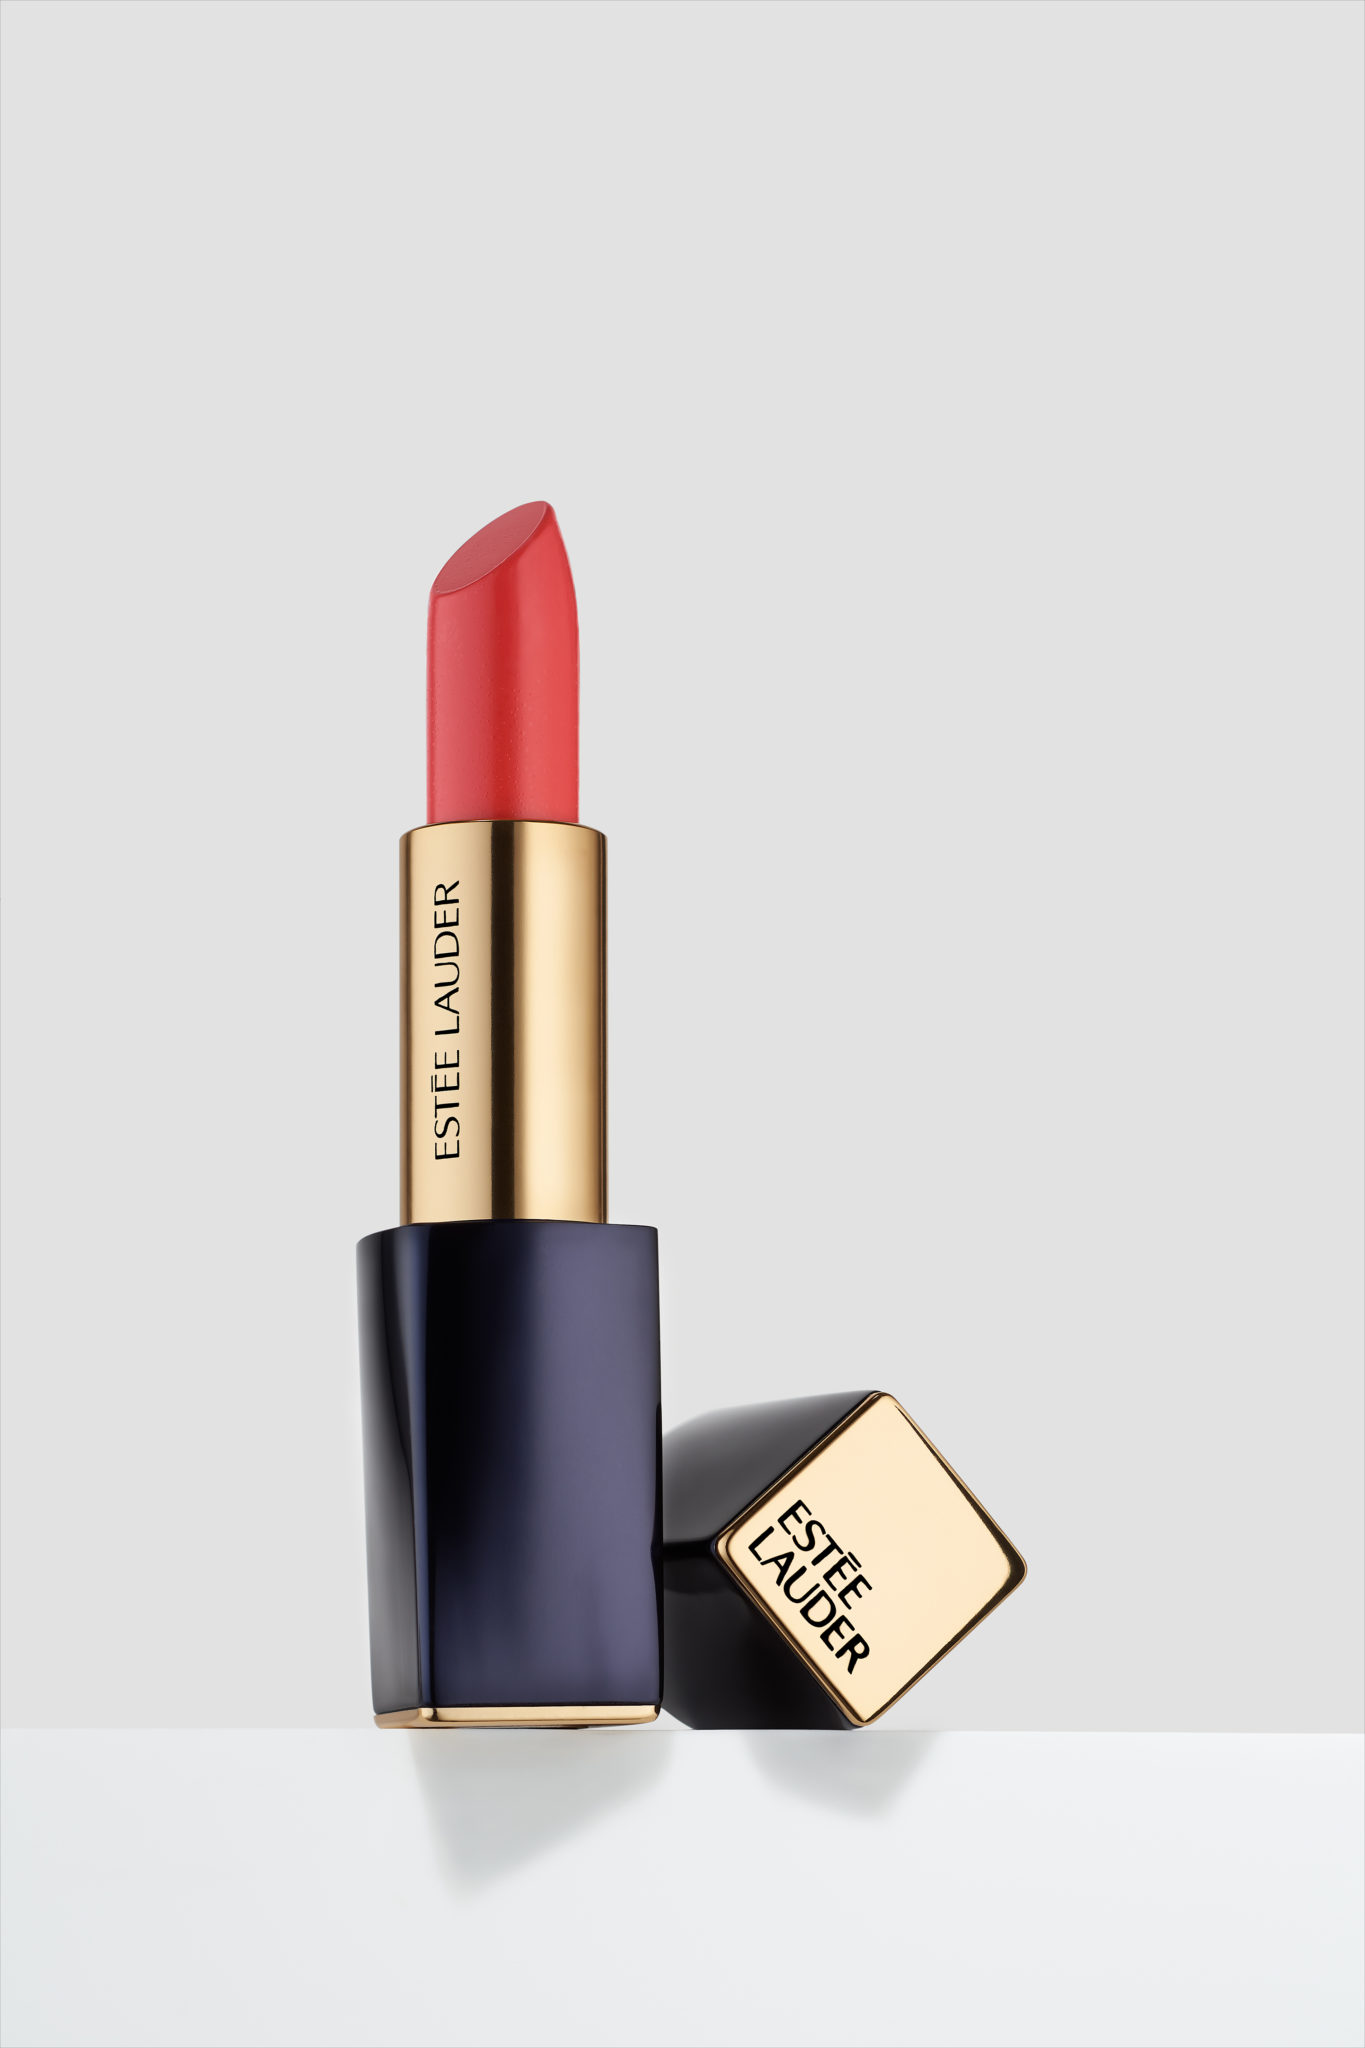 a product detail of the Red Estee Lauder Lip Stick